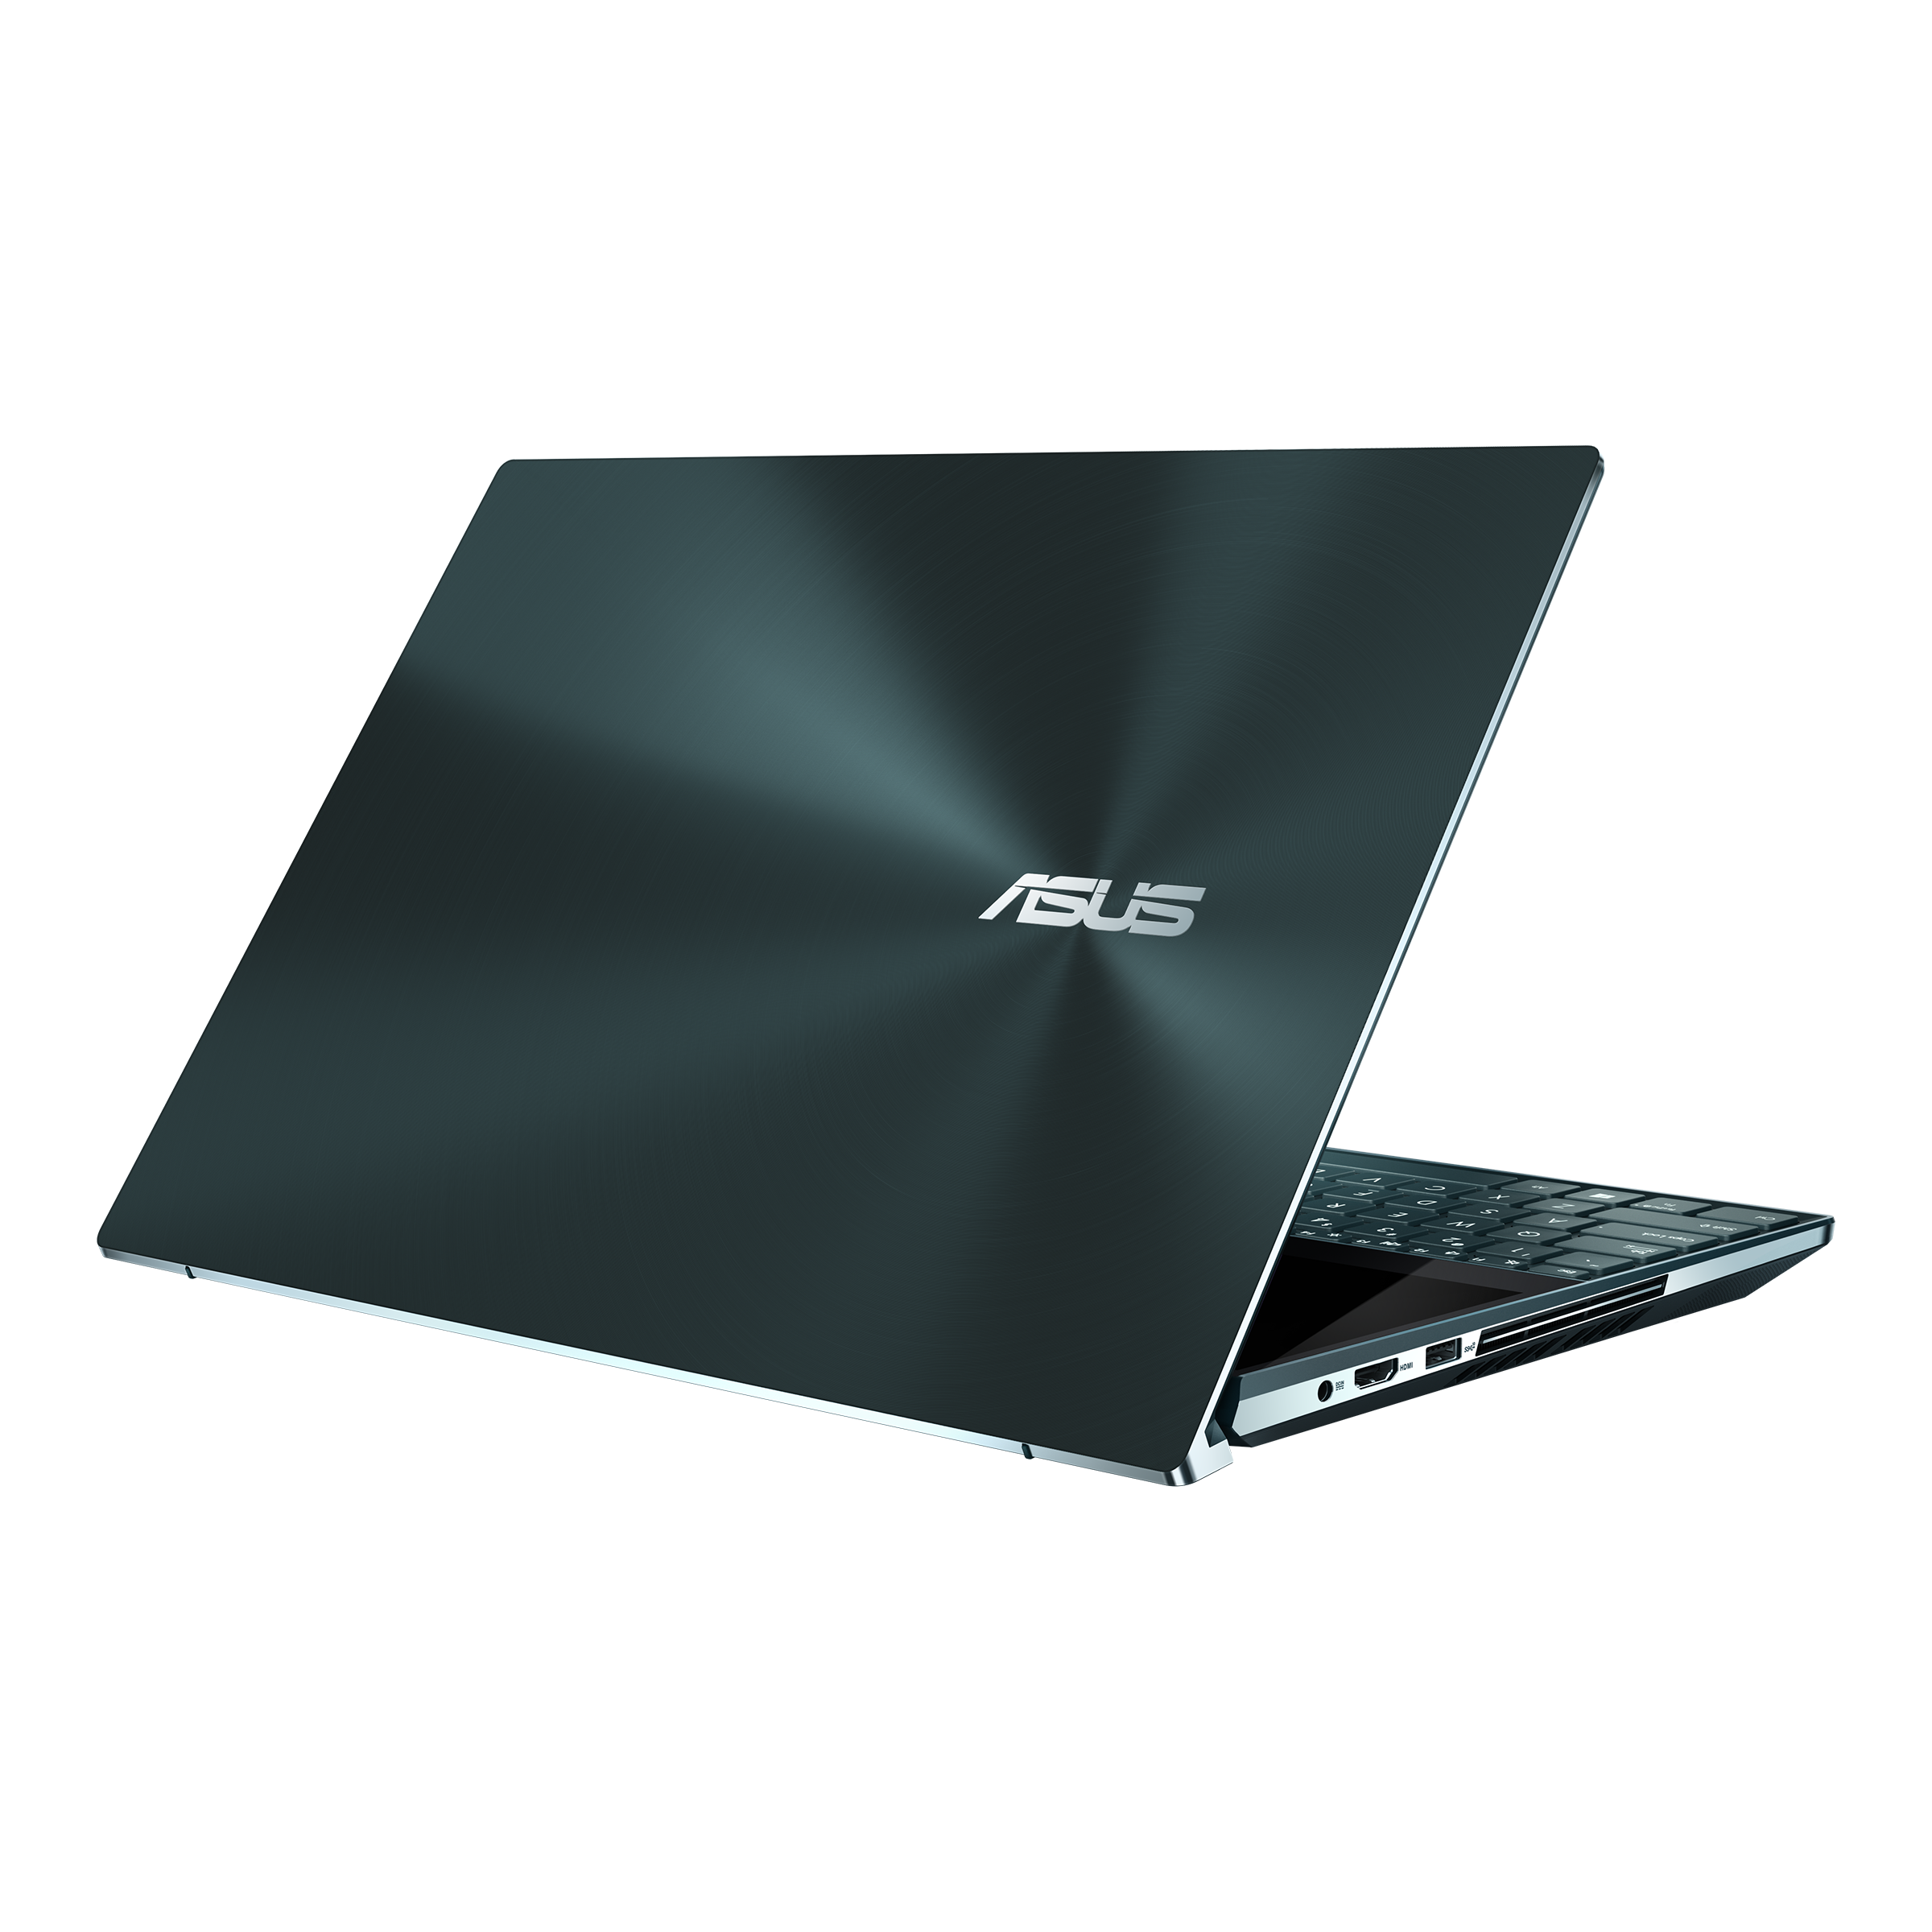 Zenbook Duo UX481｜Laptops For Home｜ASUS USA